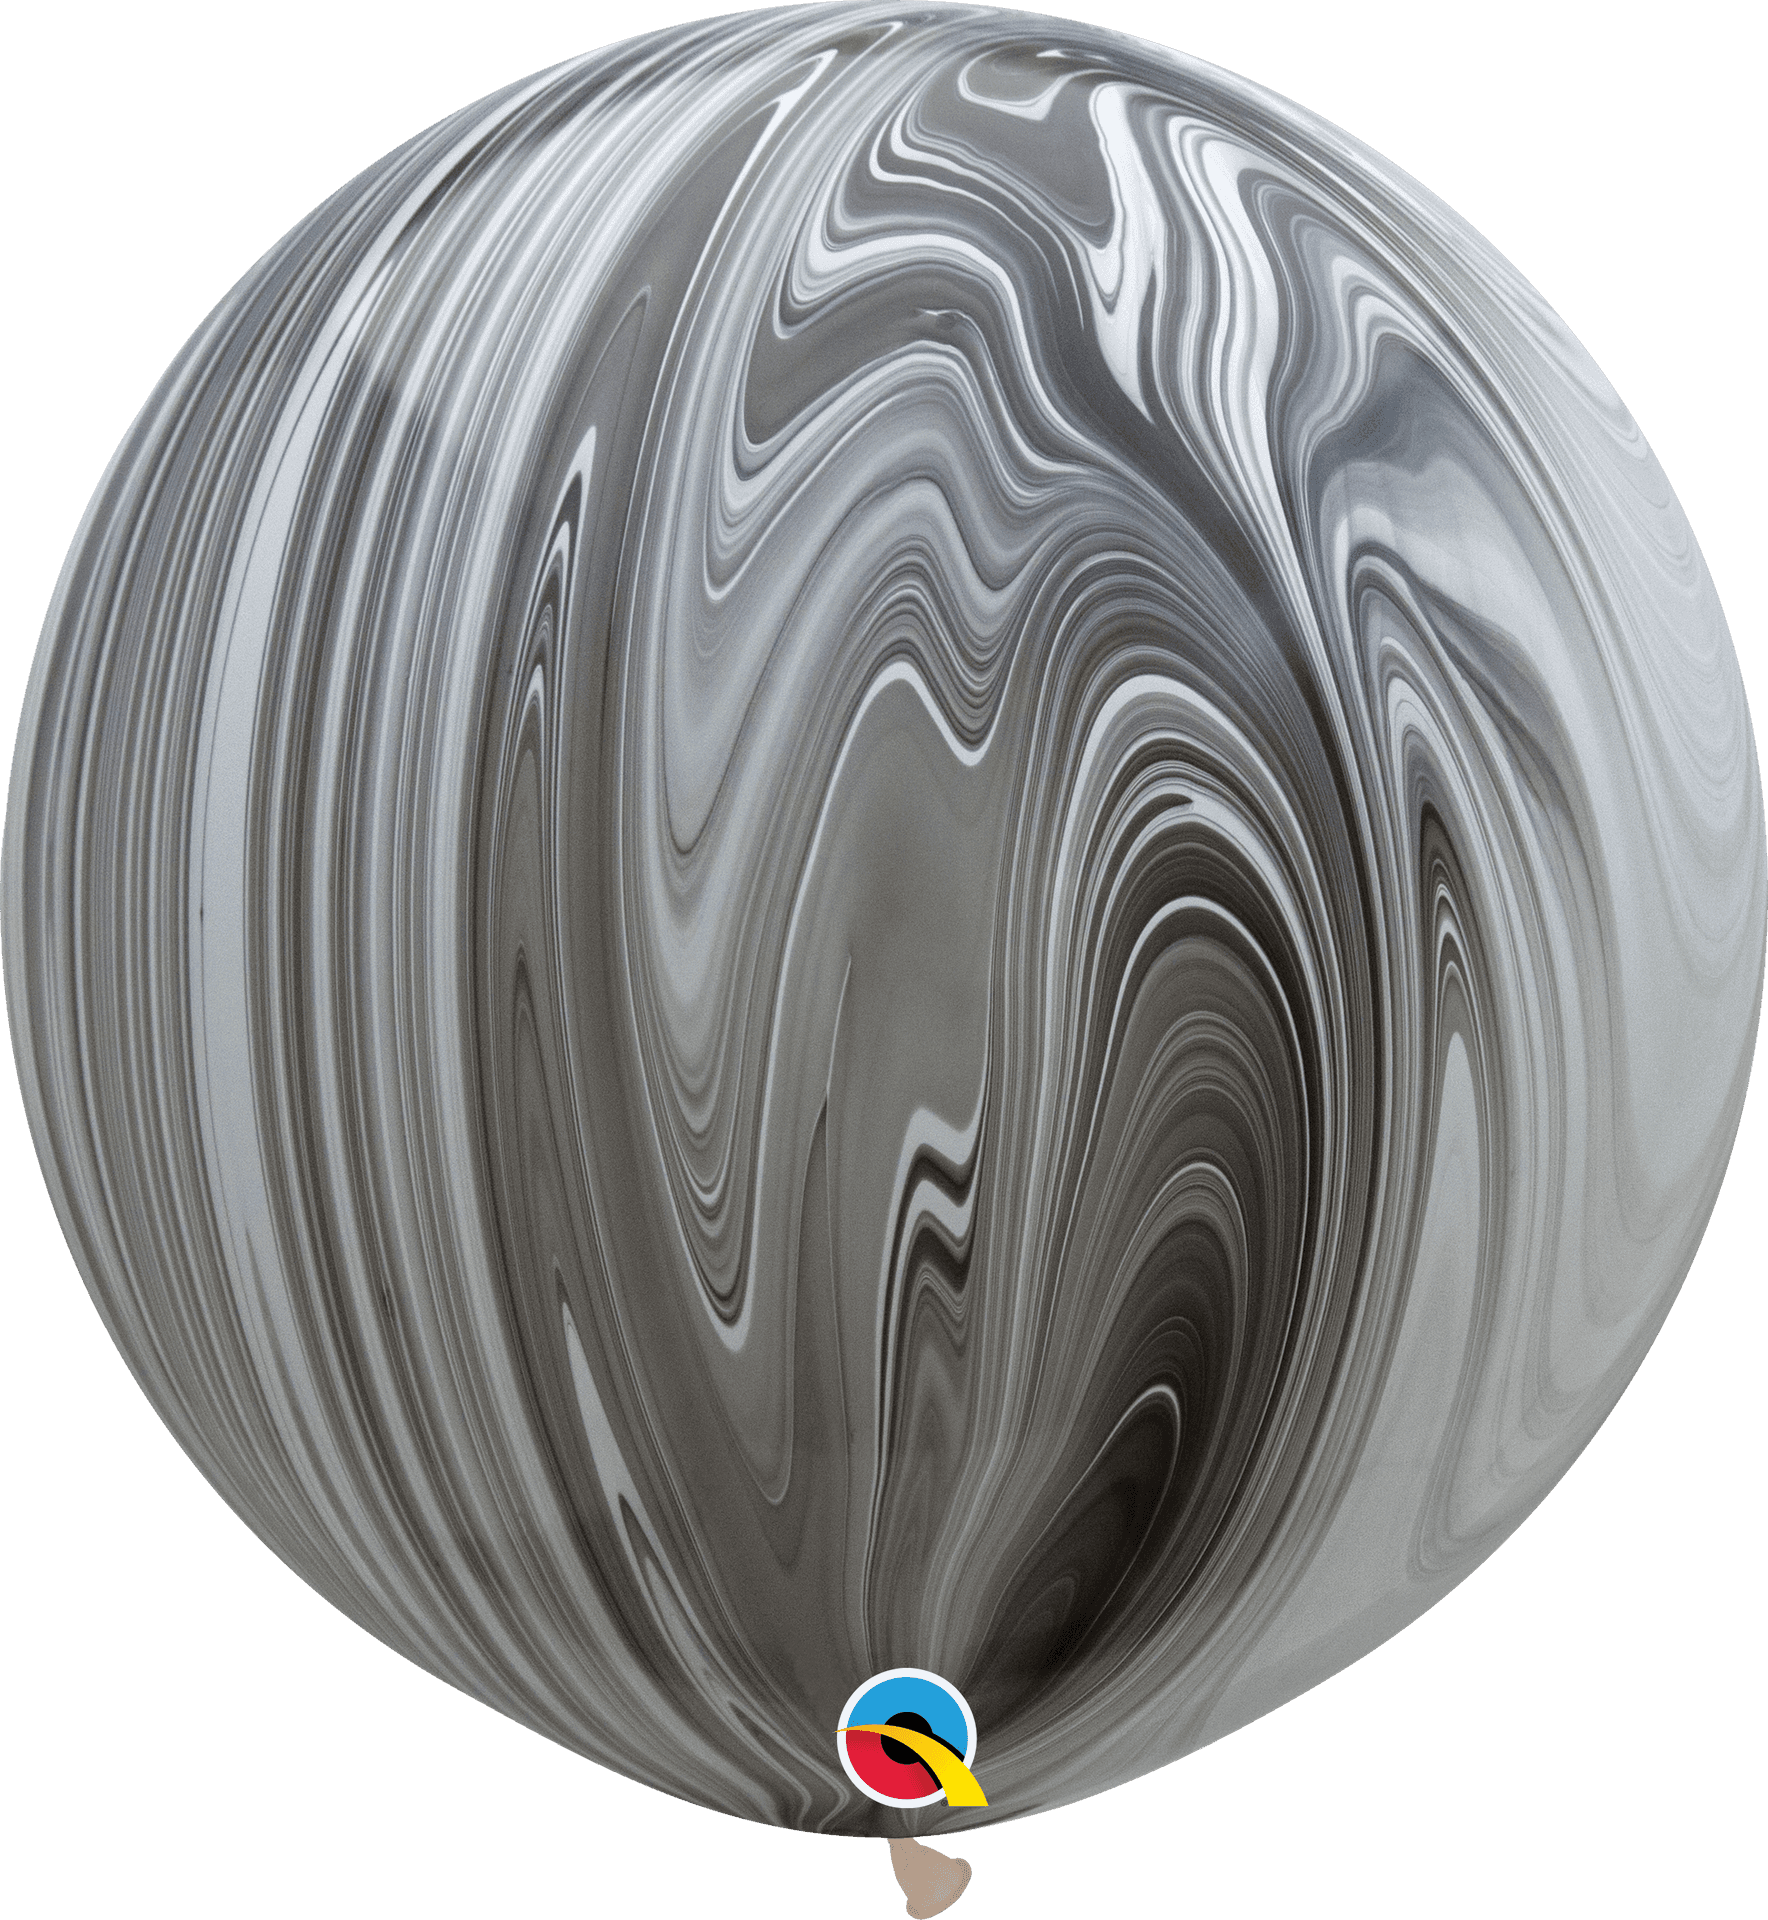 Swirled Reality Effect PNG